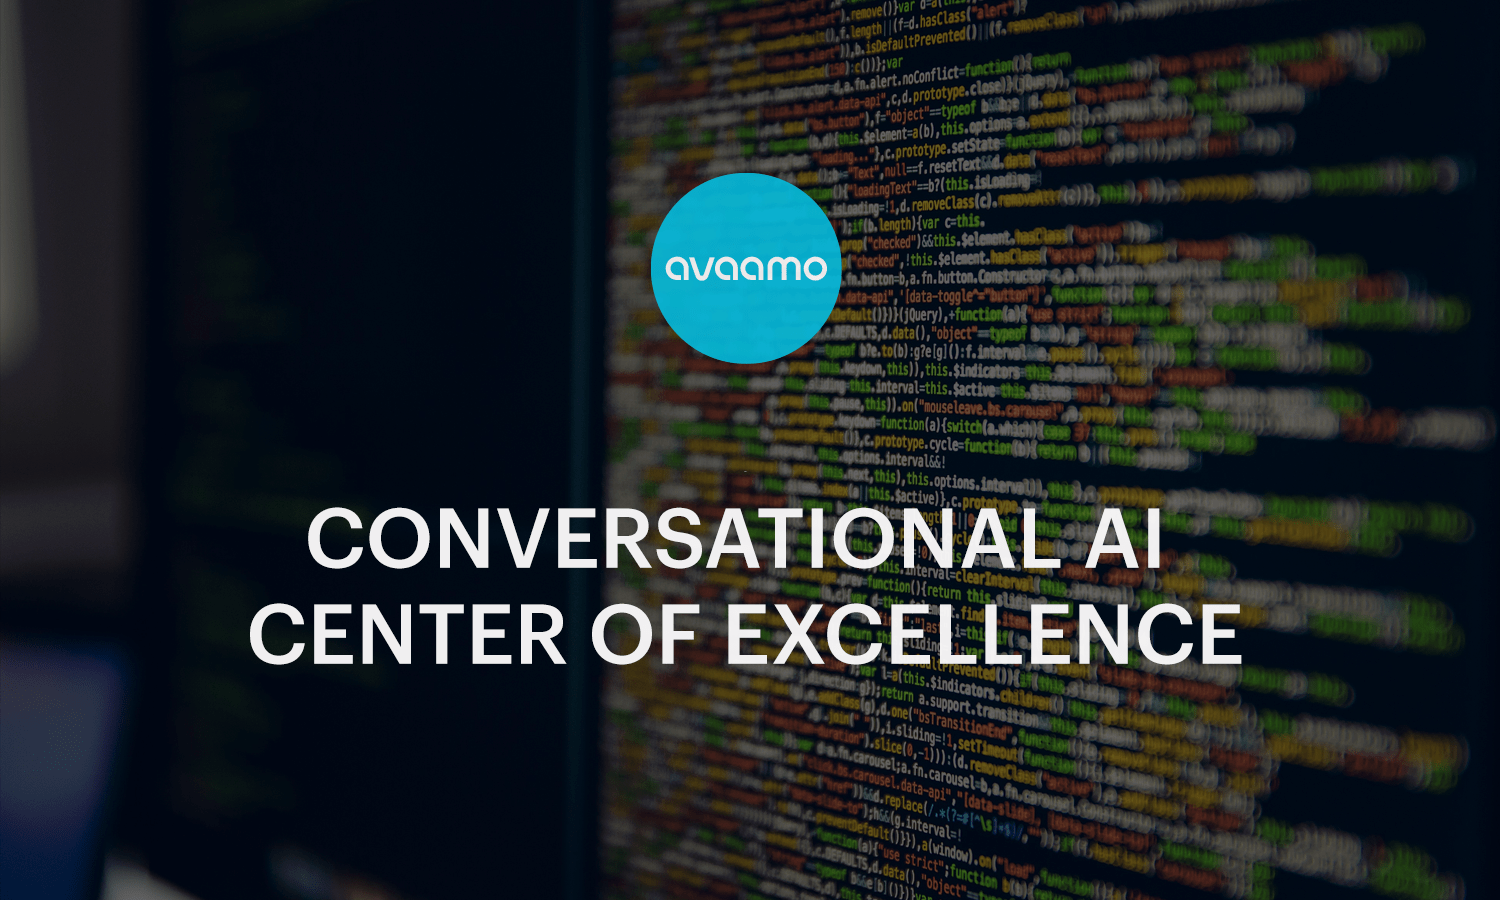 Excellence in conversational AI